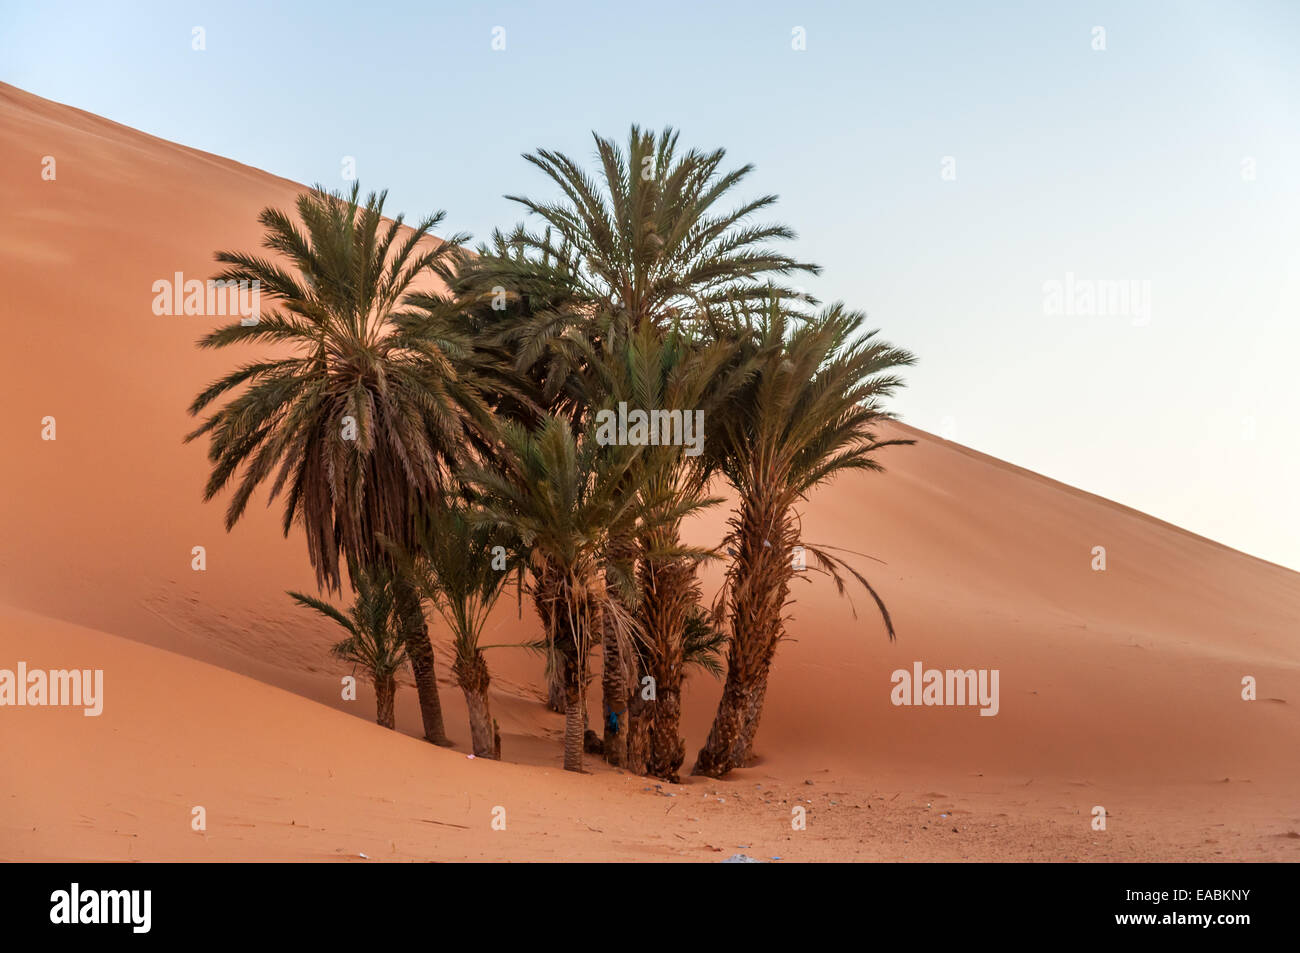 Date palm trees in the Sahara desert. Morocco, Africa Stock Photo